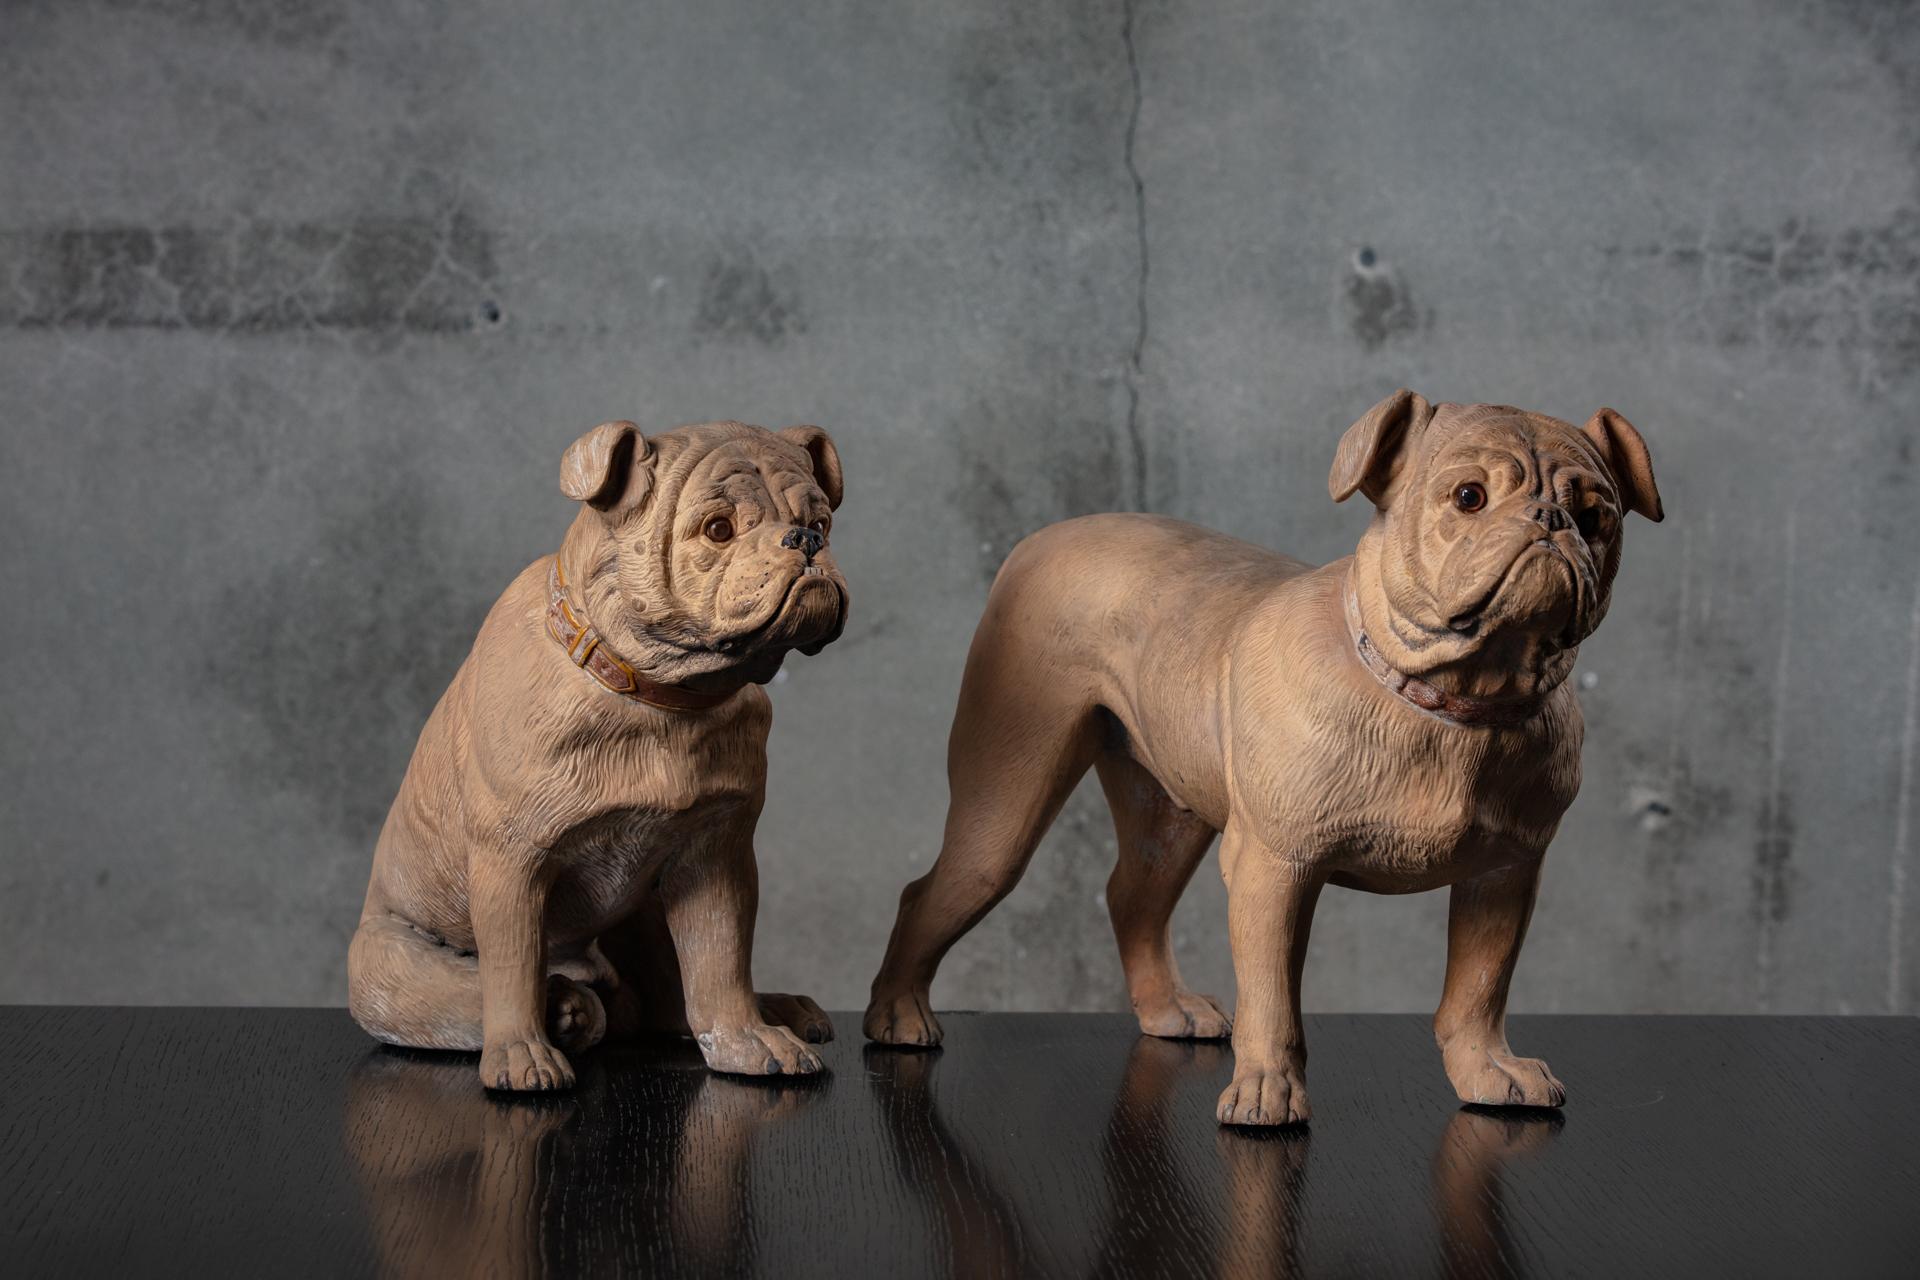 England pair of terra cotta bulldogs, 19th century.
Dimension shown for the larger of the two.